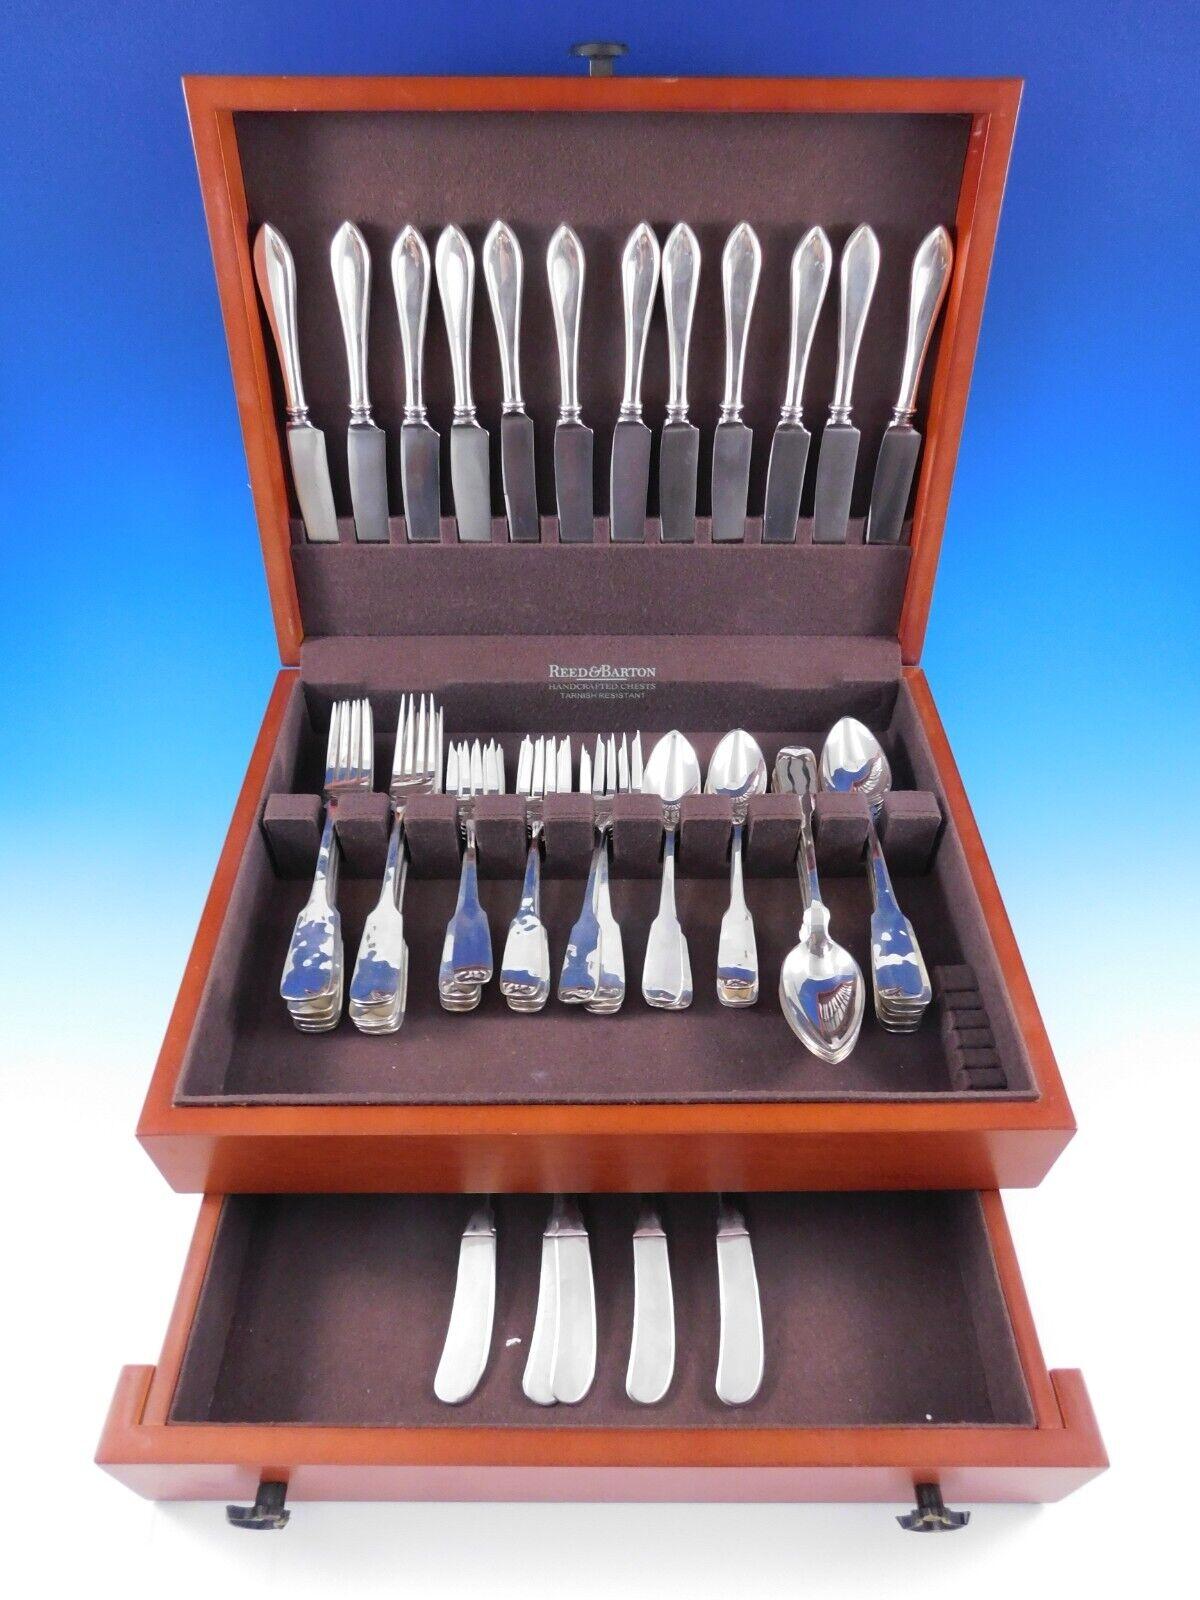 Old Newbury Crafters silver is genuinely hand-made and wonderfully heavy, the machine cannot match the quality, durability, look and feel of handmade silver.


Superb 72 piece sterling silver set of Sturbridge made by Old Newbury Crafters (including